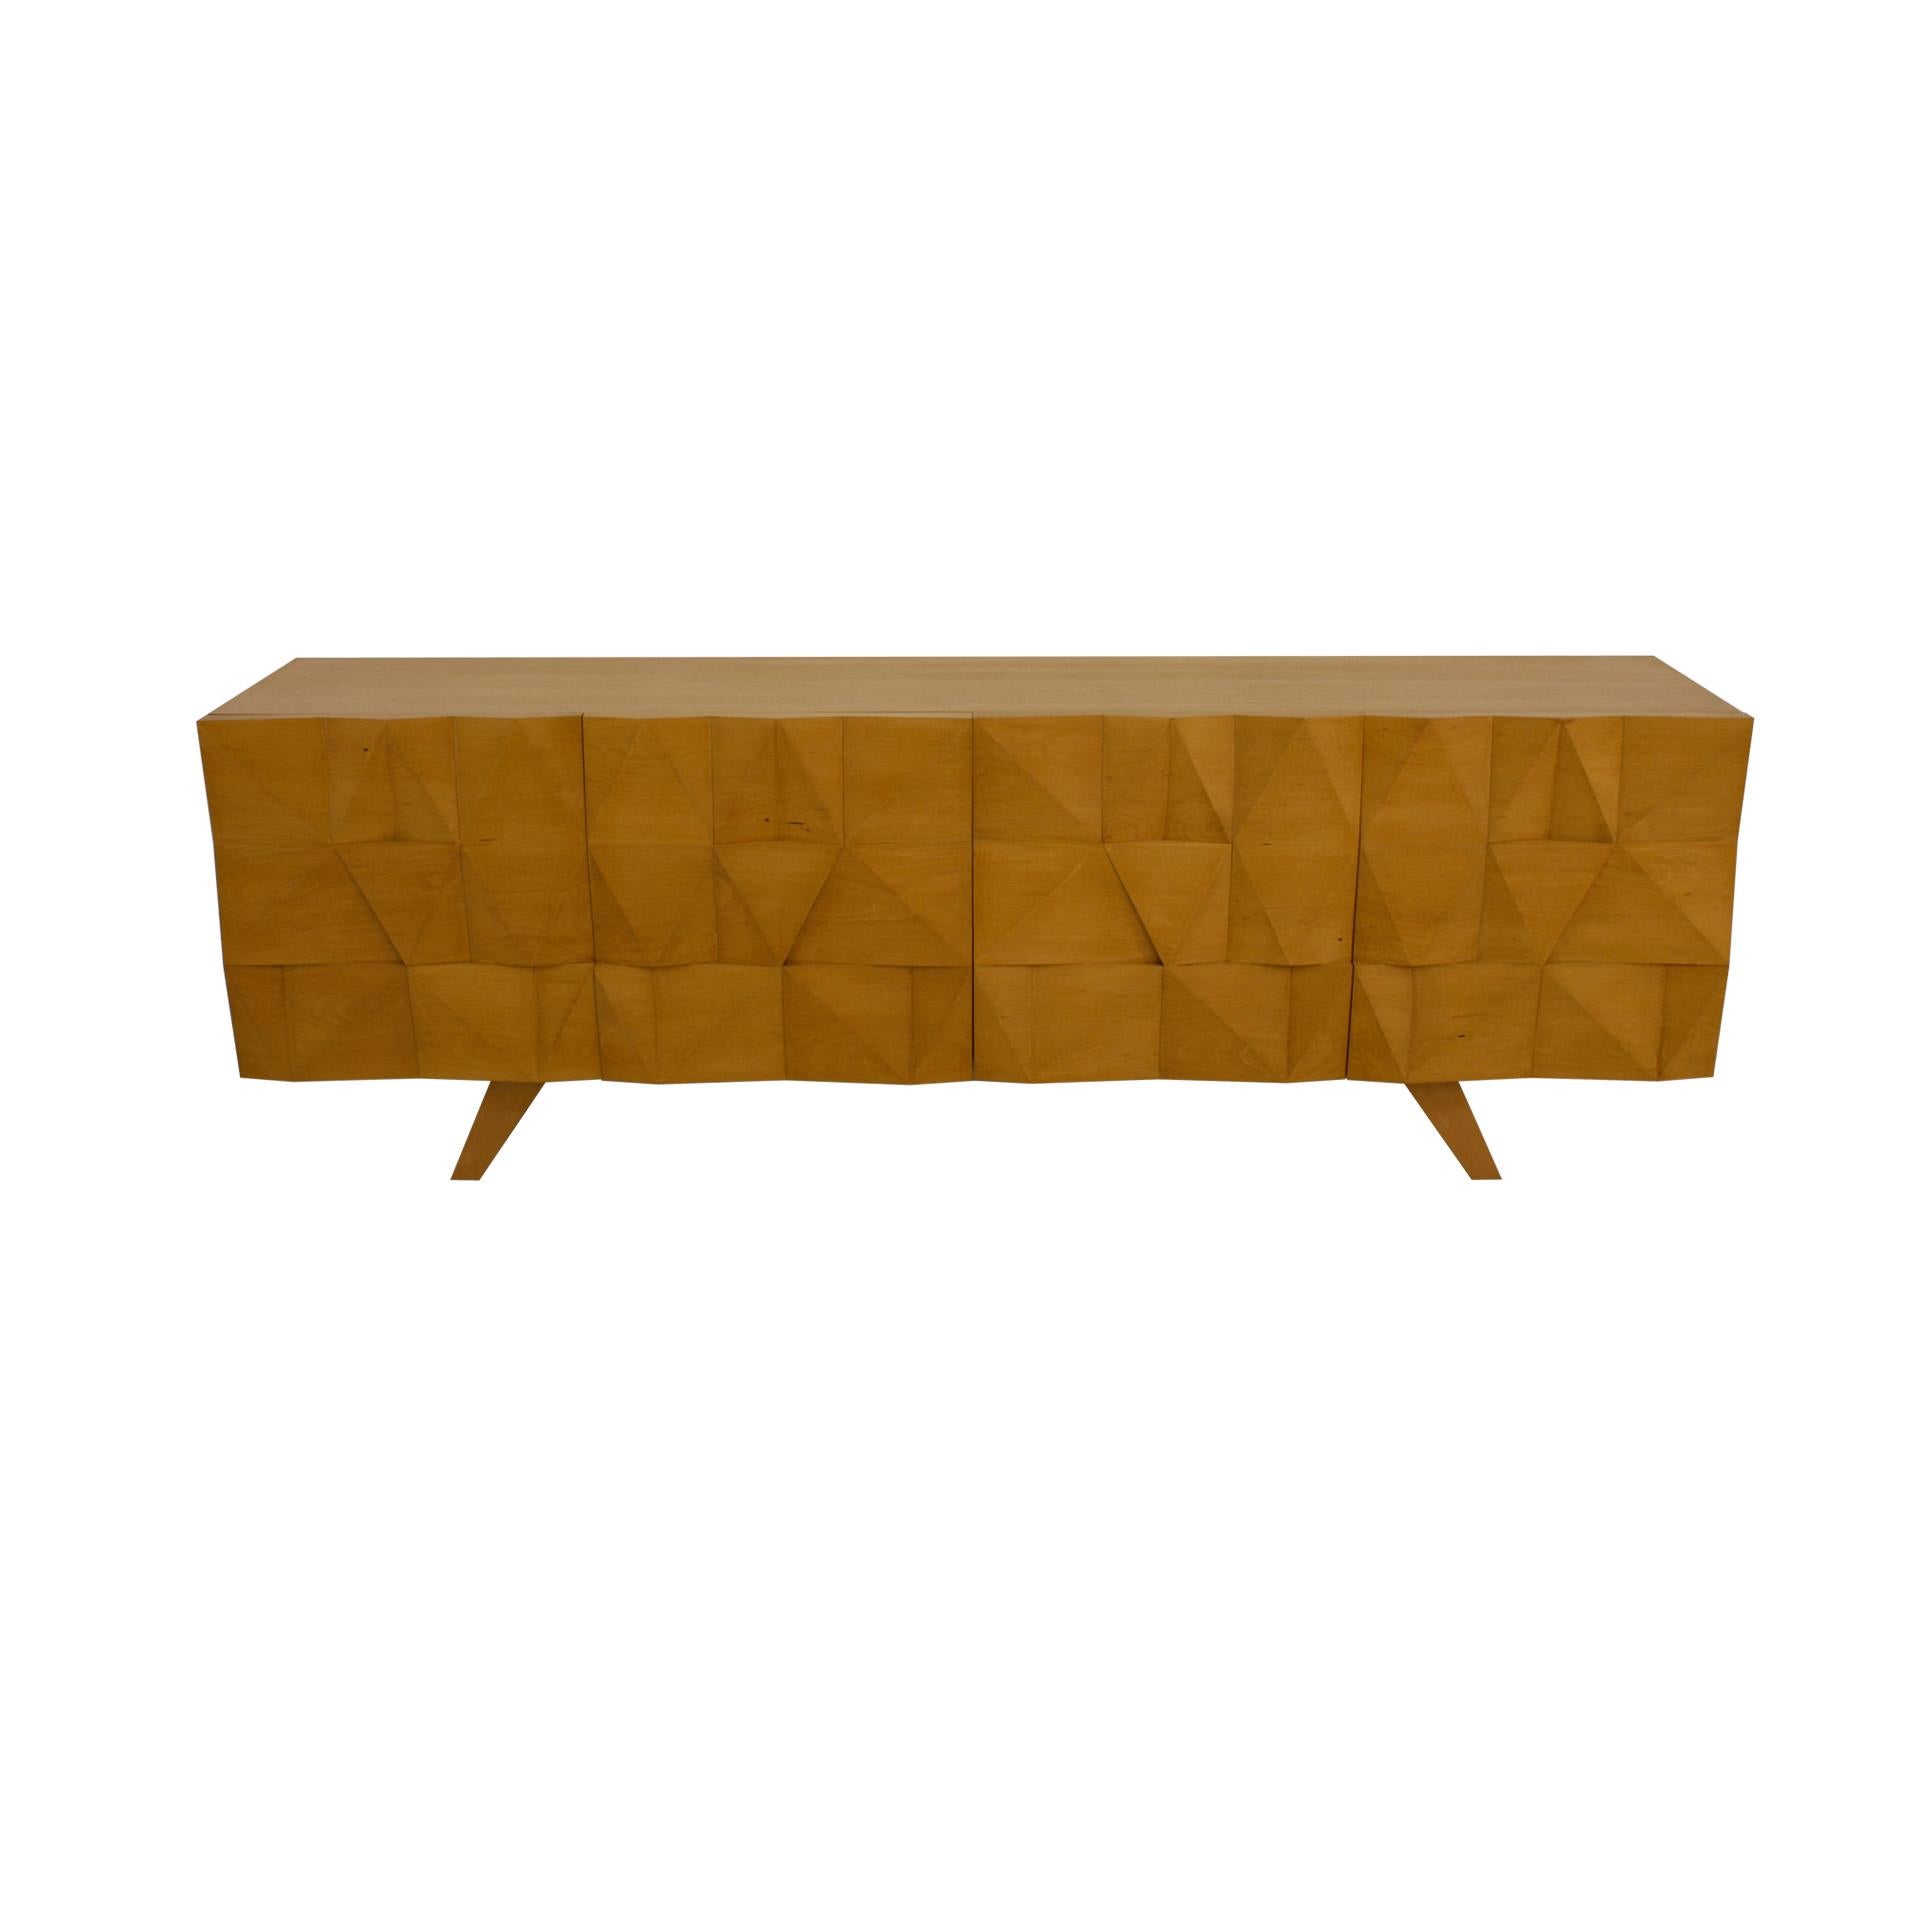 Wood sideboard designed by L.A. Studio composed of 4 doors, two them sliding and two of them foldable. It is made of American alder wood.

Our main target is customer satisfaction, so we include in the price for this item professional and custom